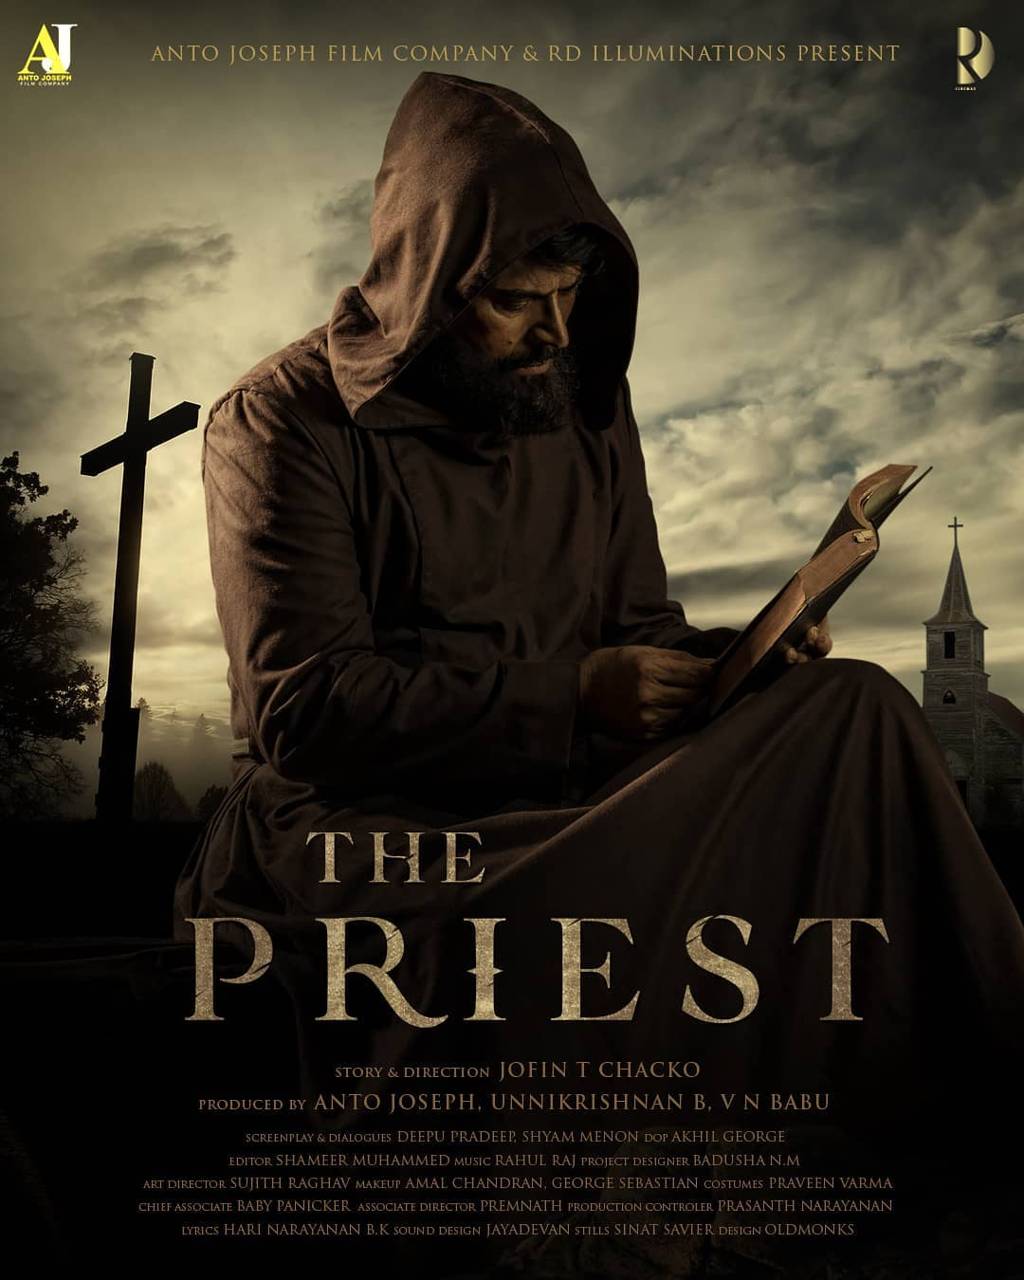 Download The Priest Wallpaper HD By Societys2cent. Wallpaper HD.Com